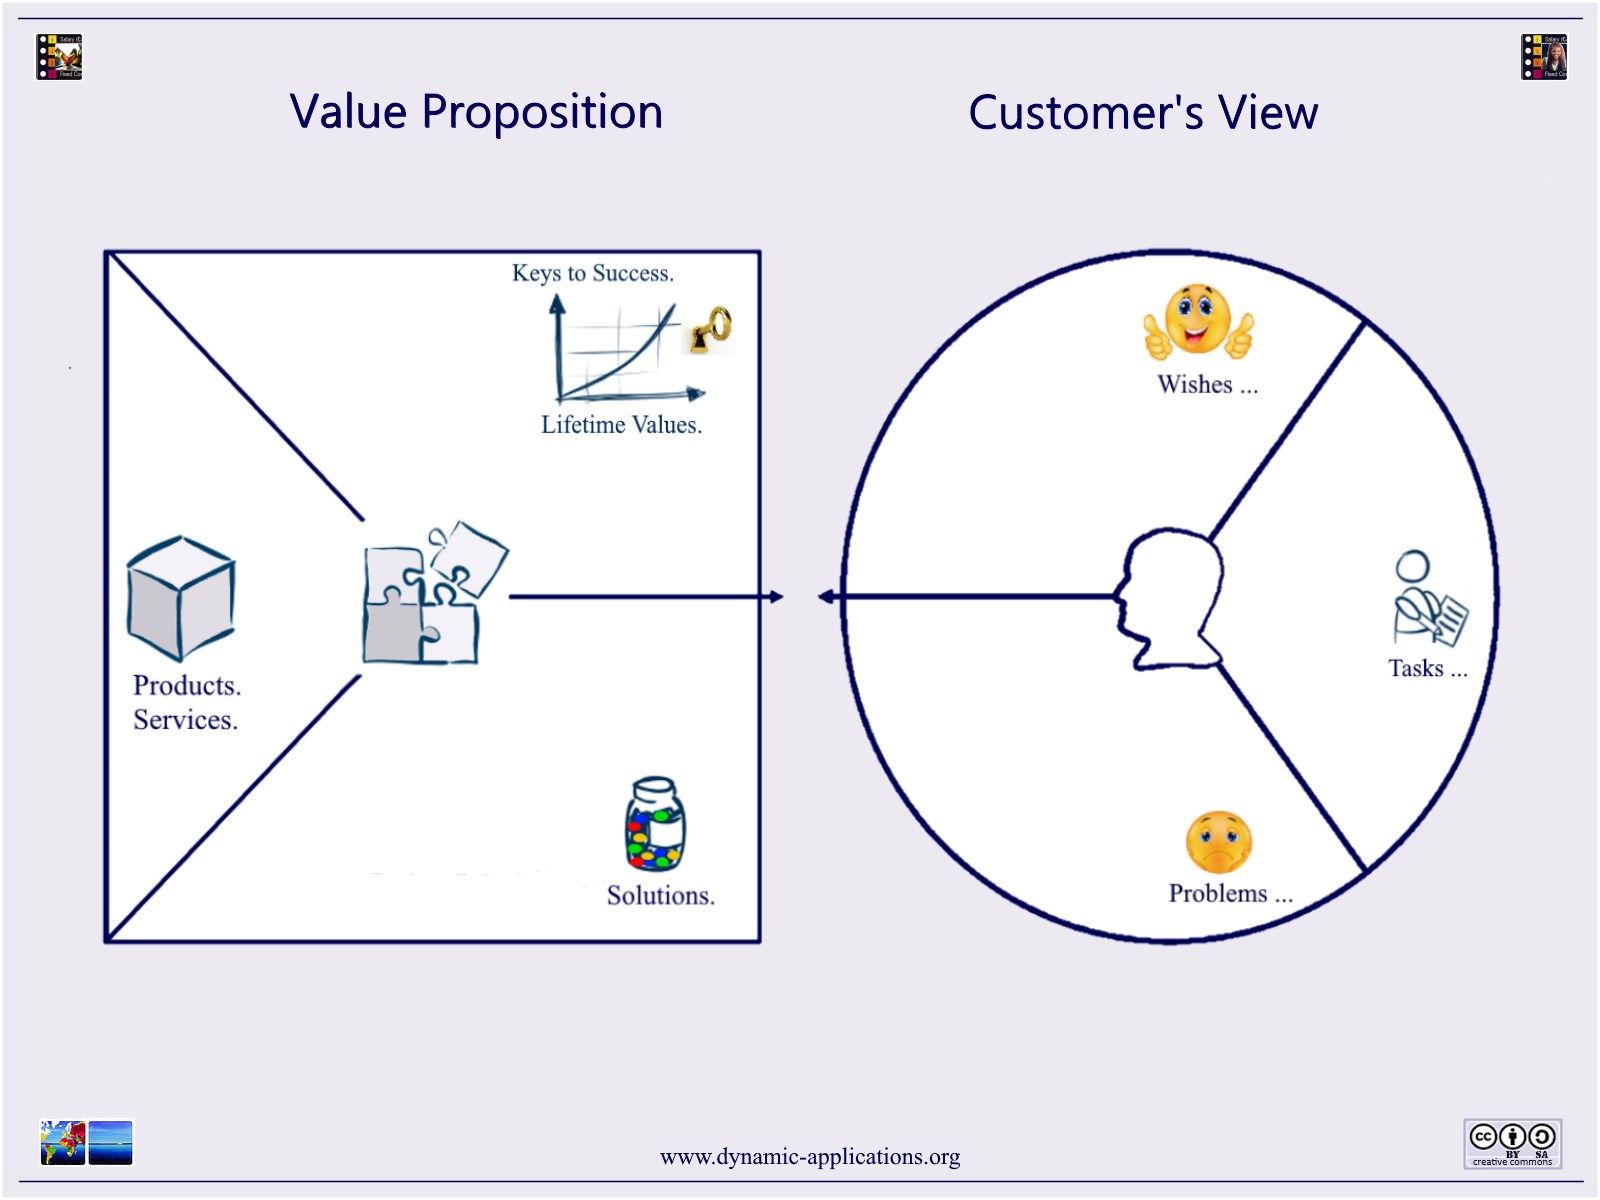 Value Proposition - calculate your Product and Service offering in (€$& / hour).